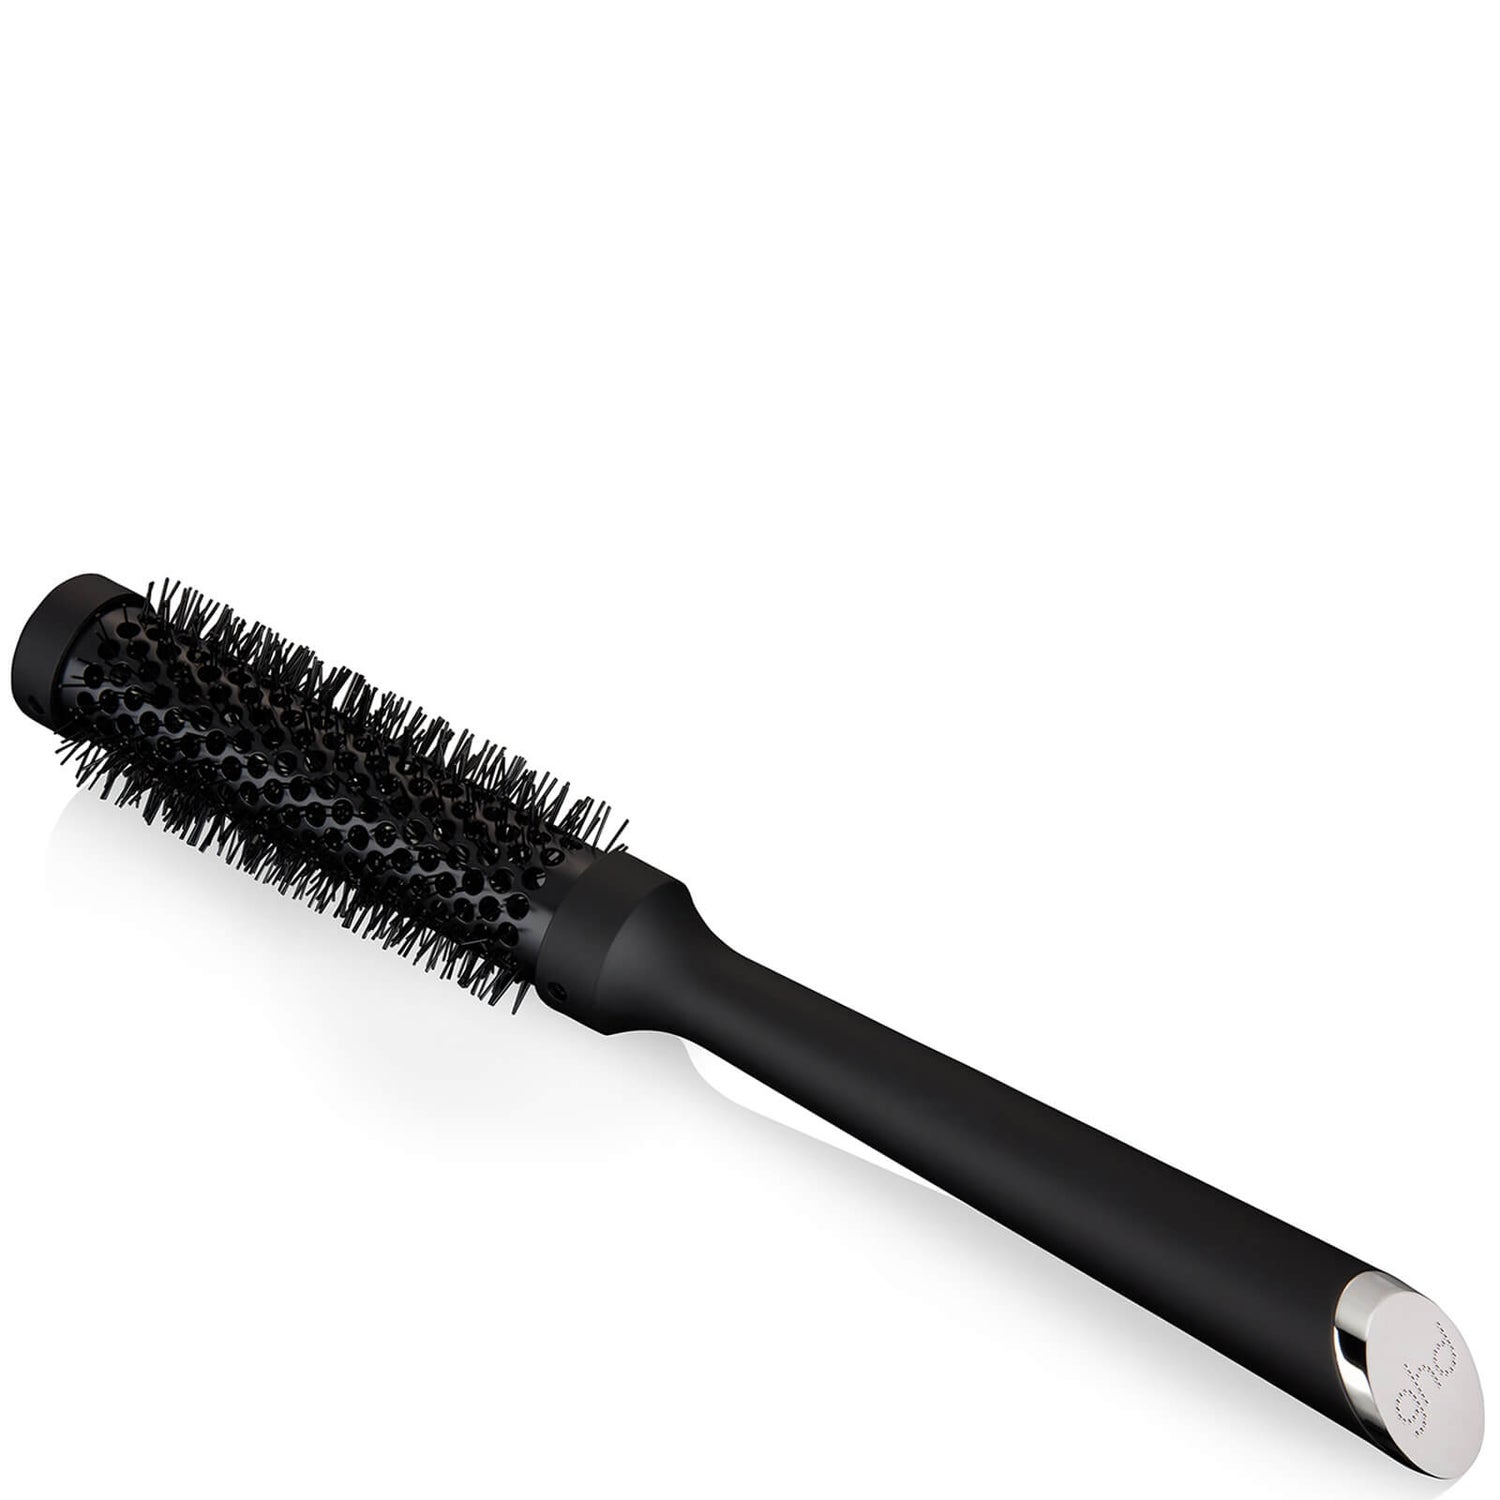 ghd The Blow Dryer Ceramic Radial Hair Brush Size 1 25mm